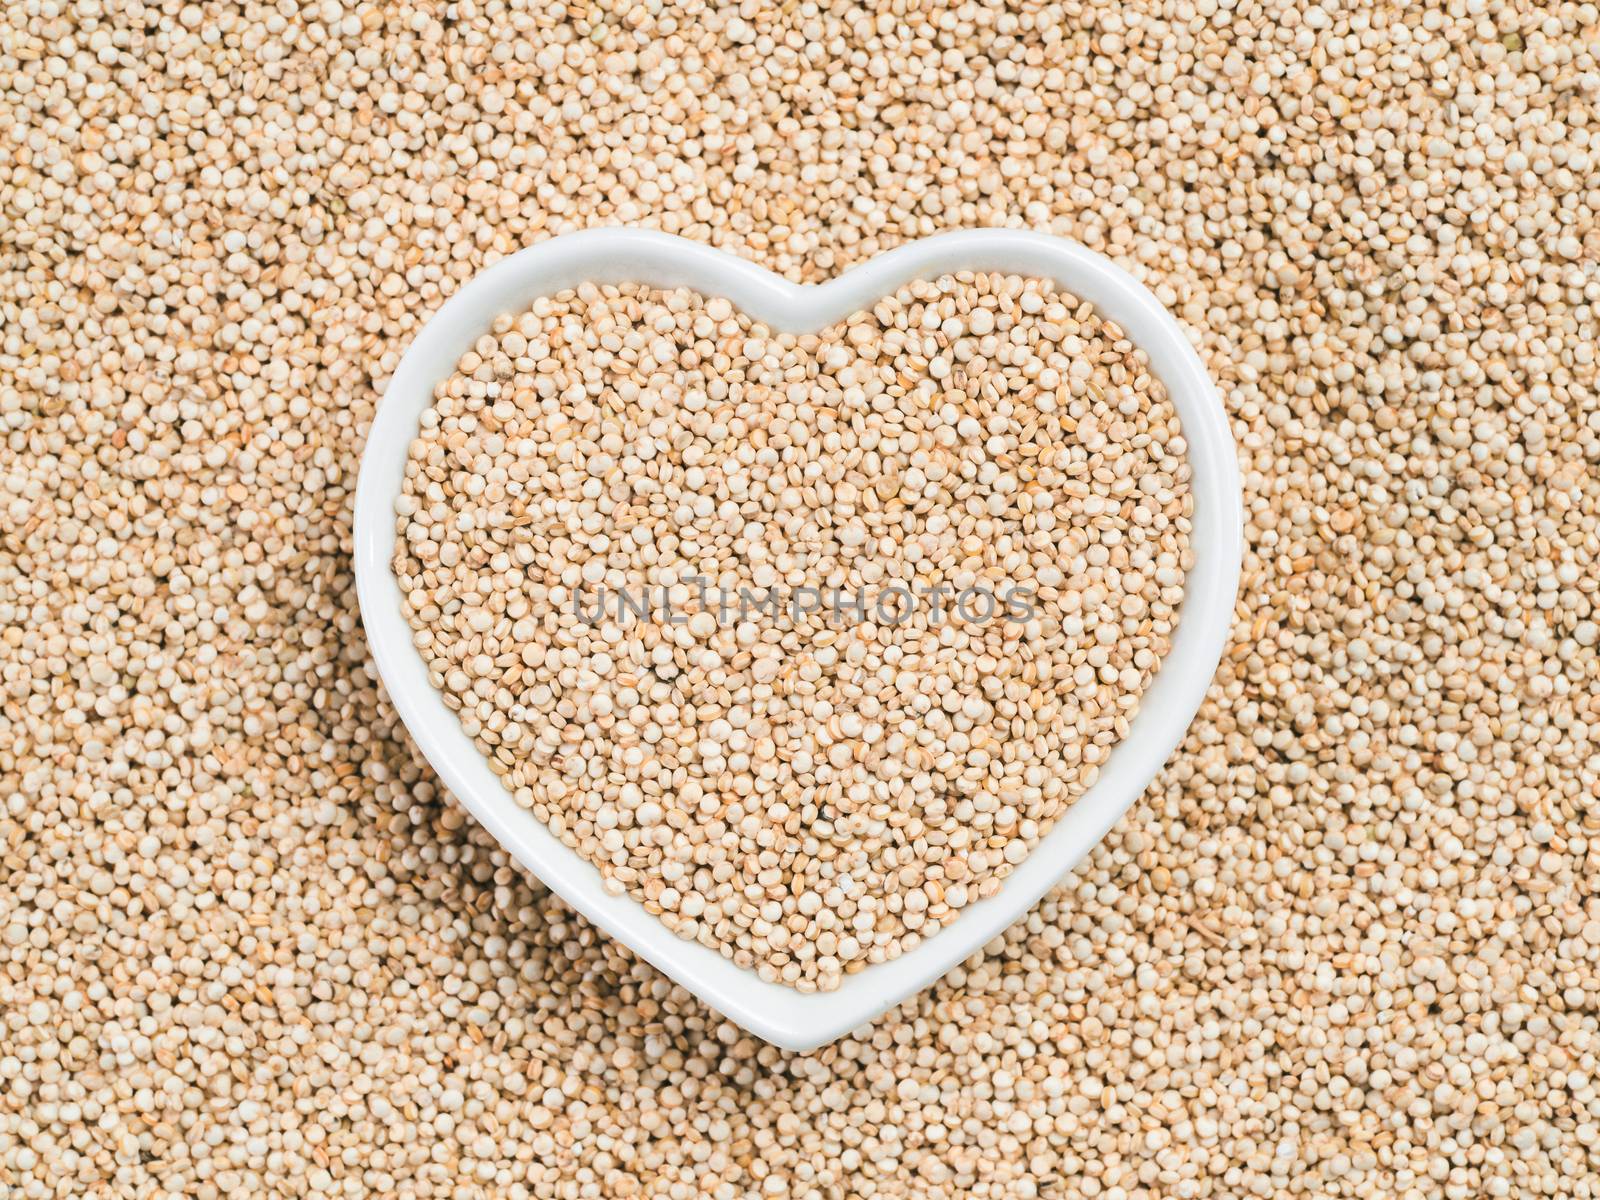 Quinoa in heart-shaped bowl on quinoa background by fascinadora